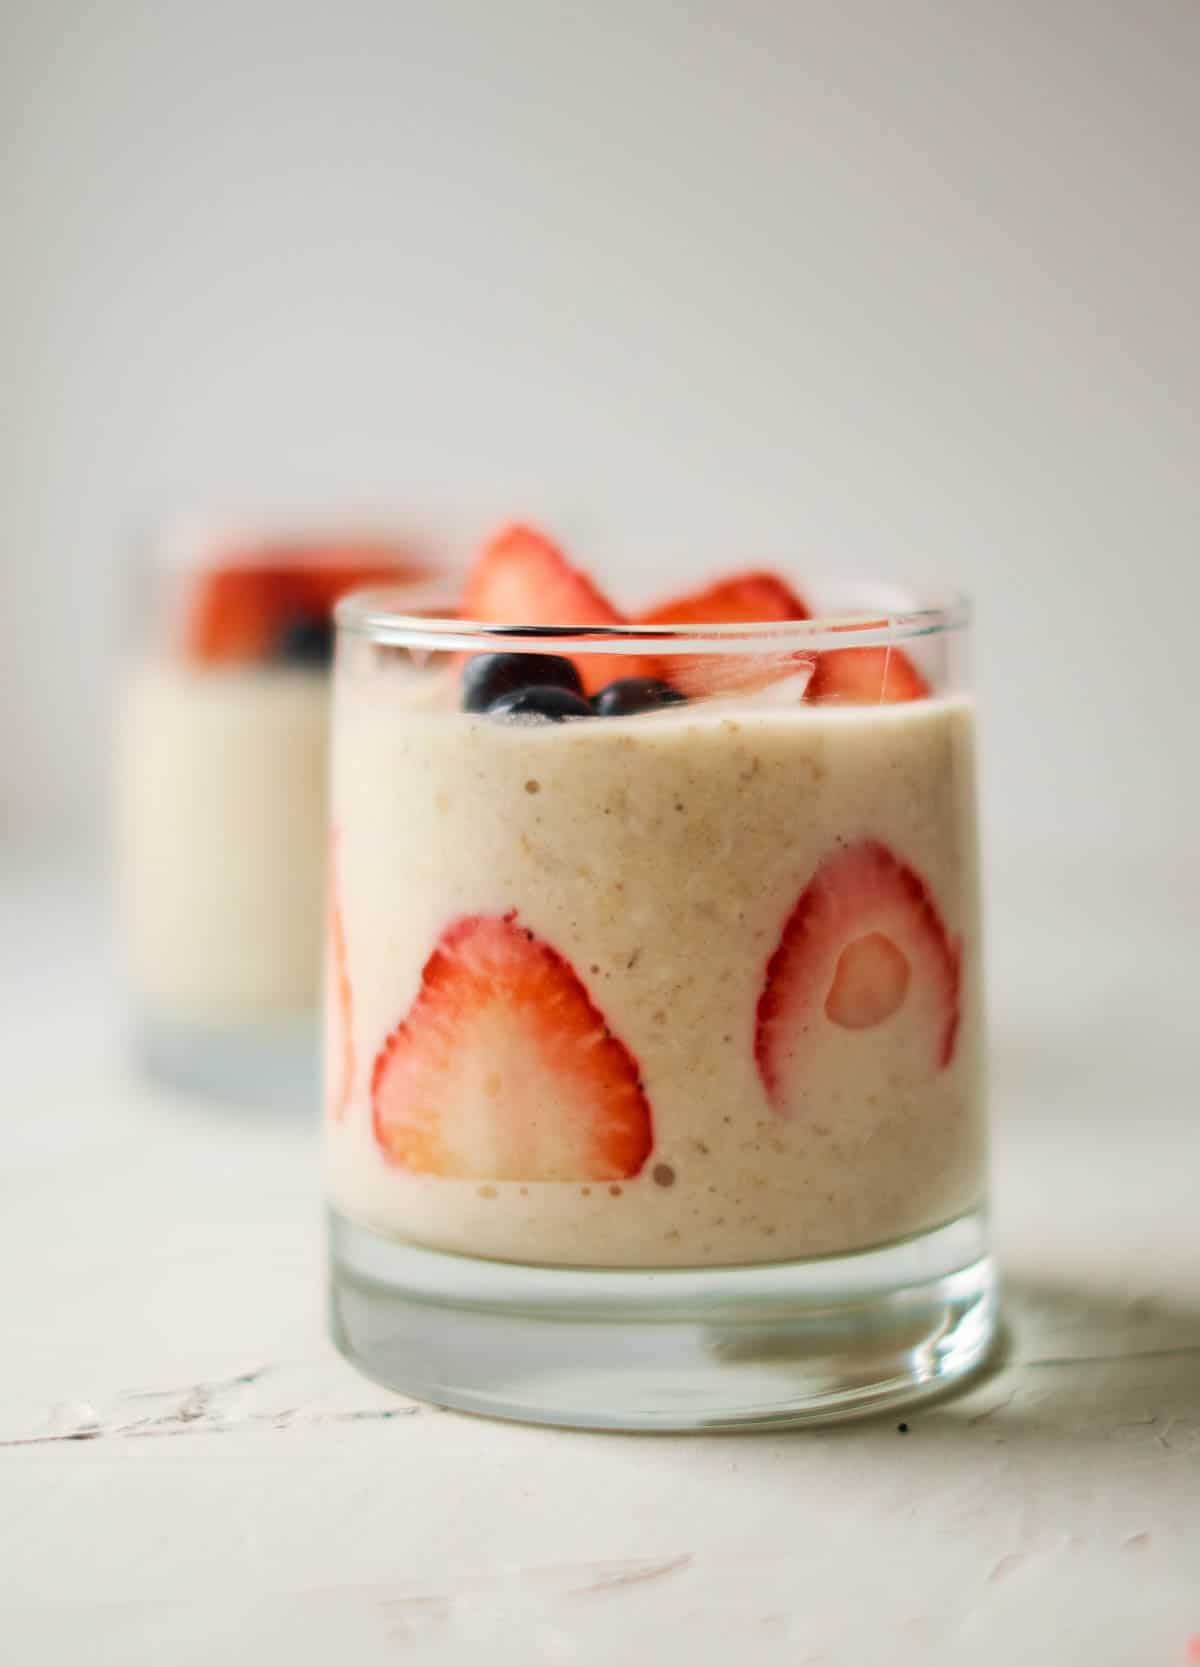 oatmeal in a glass cup topped with berries